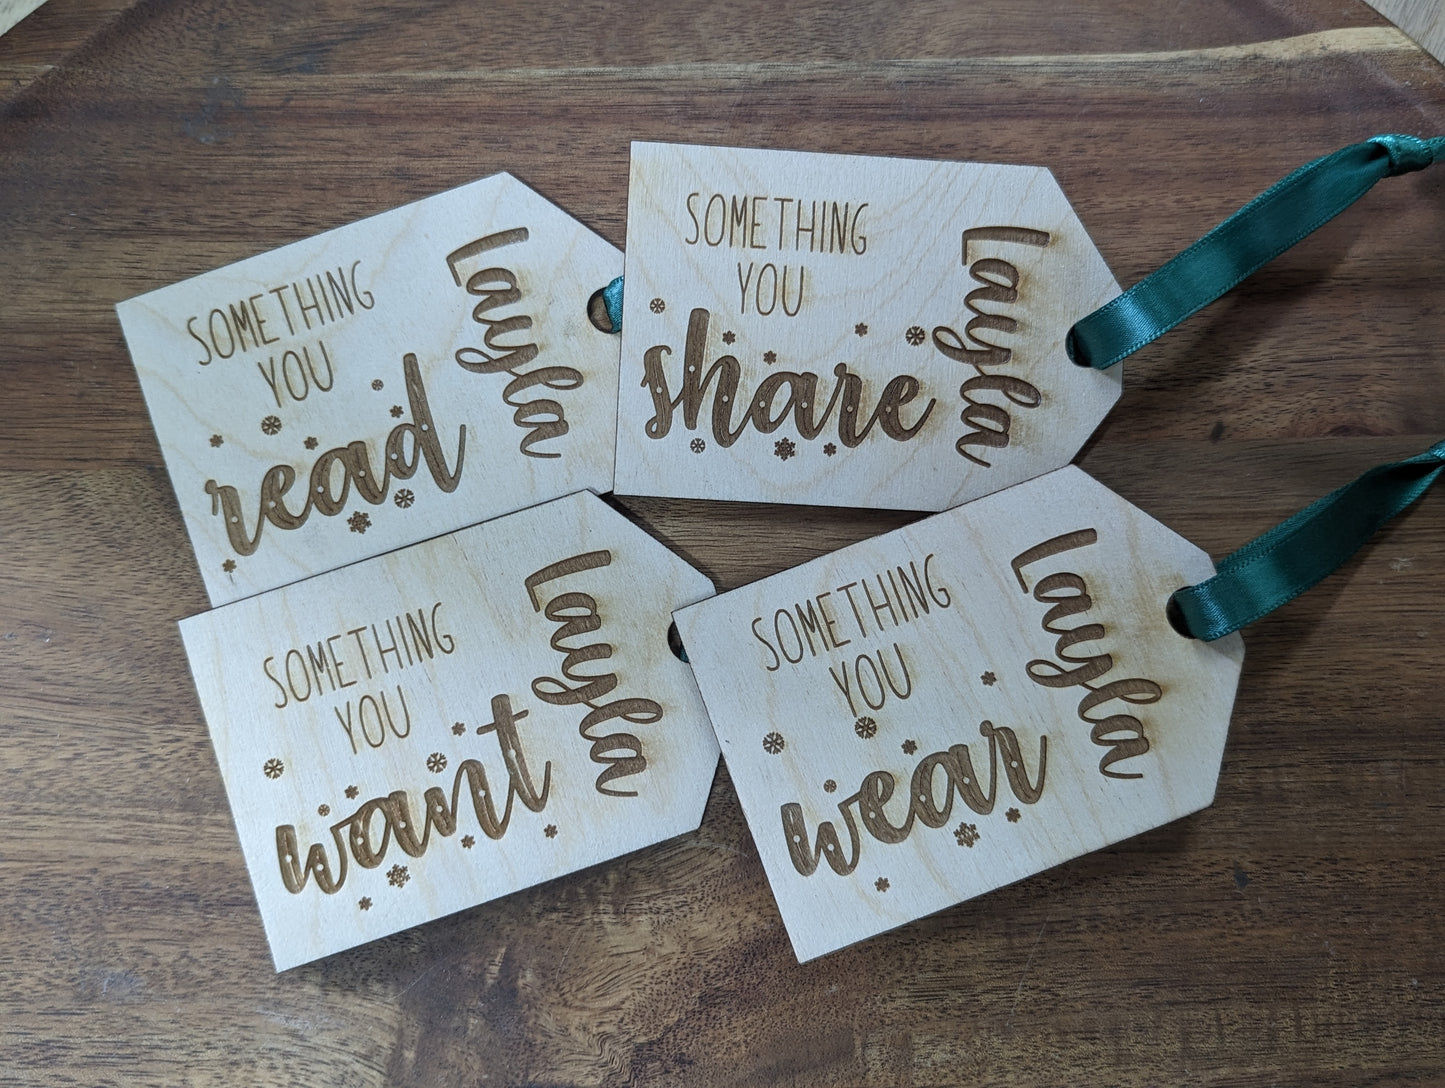 Set of 4 Custom Wooden Gift Tags Made of Wood with - Something You Wear Need Want and Read - Set of 4 Personalized Gifts